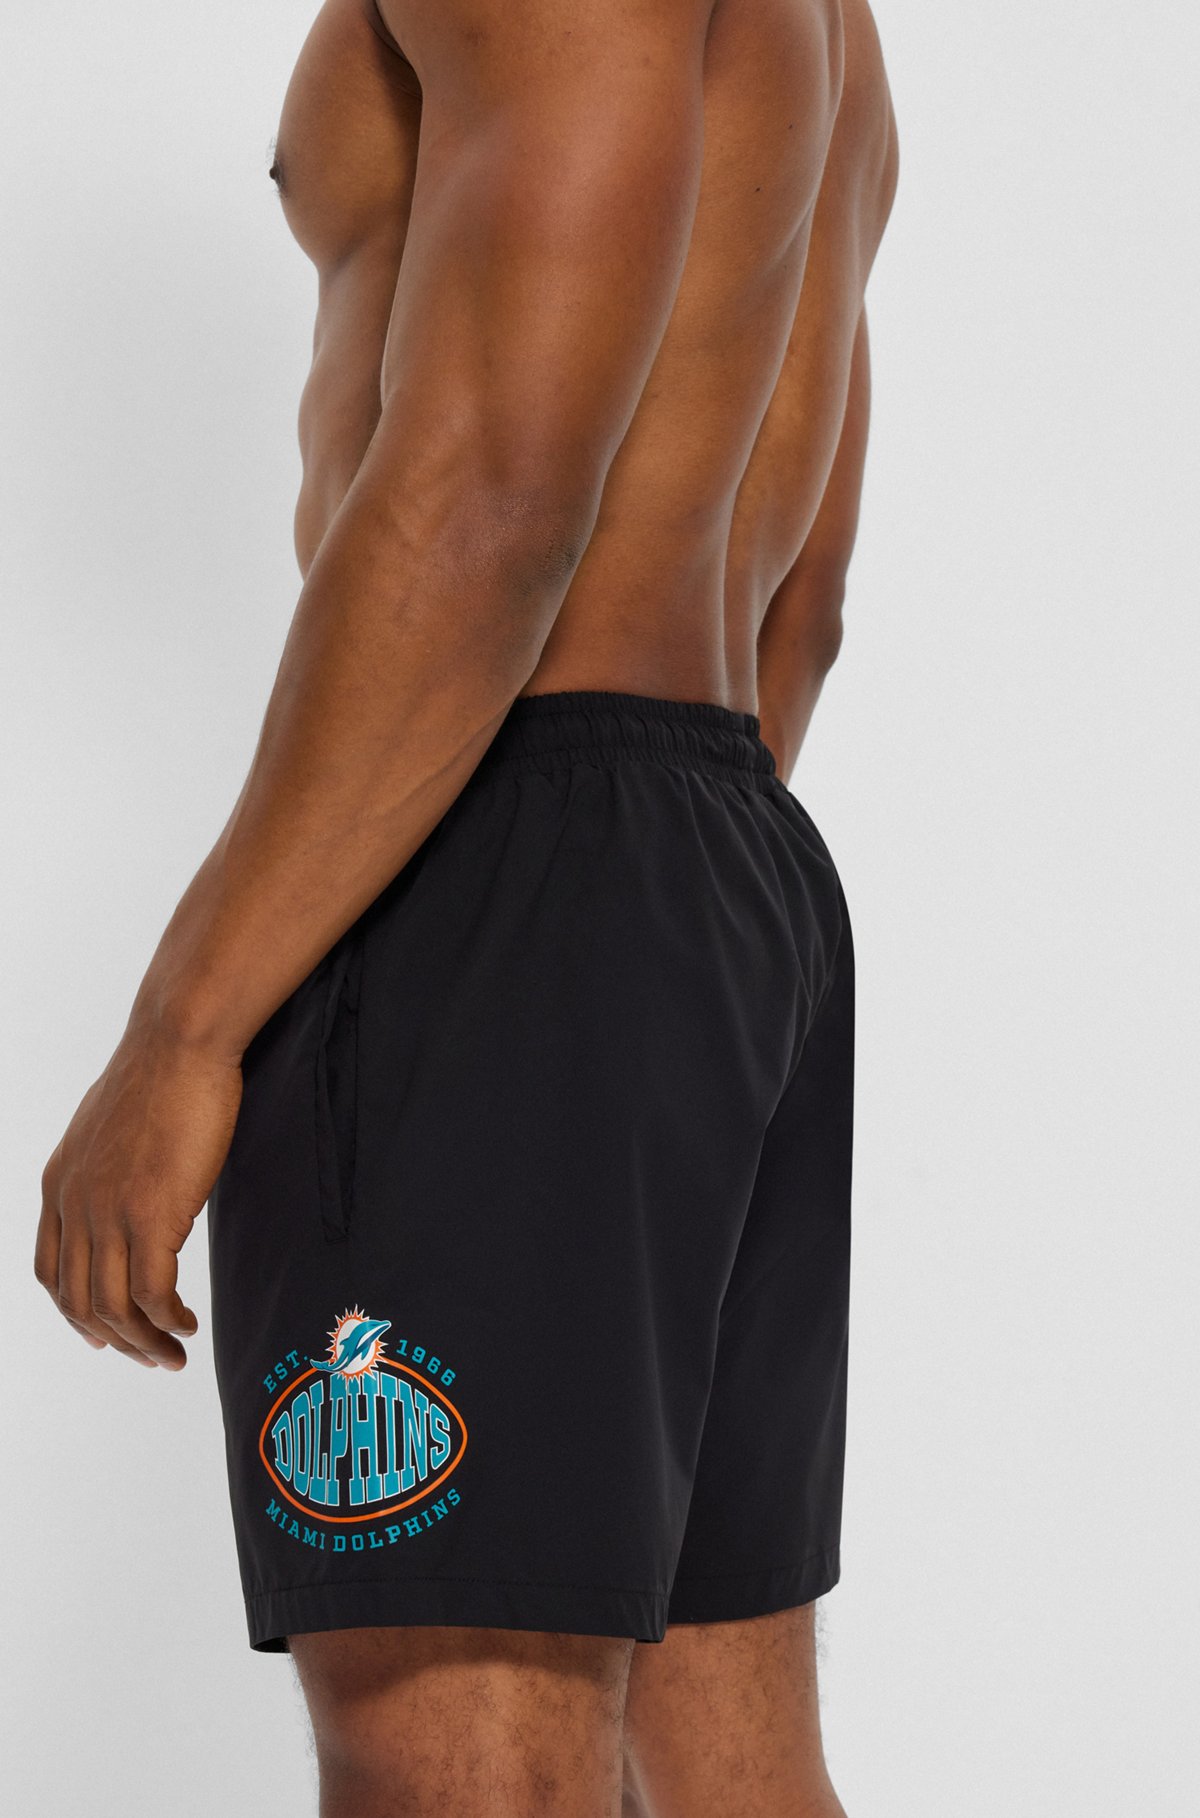 BOSS x NFL quick-dry swim shorts with collaborative branding, Dolphins